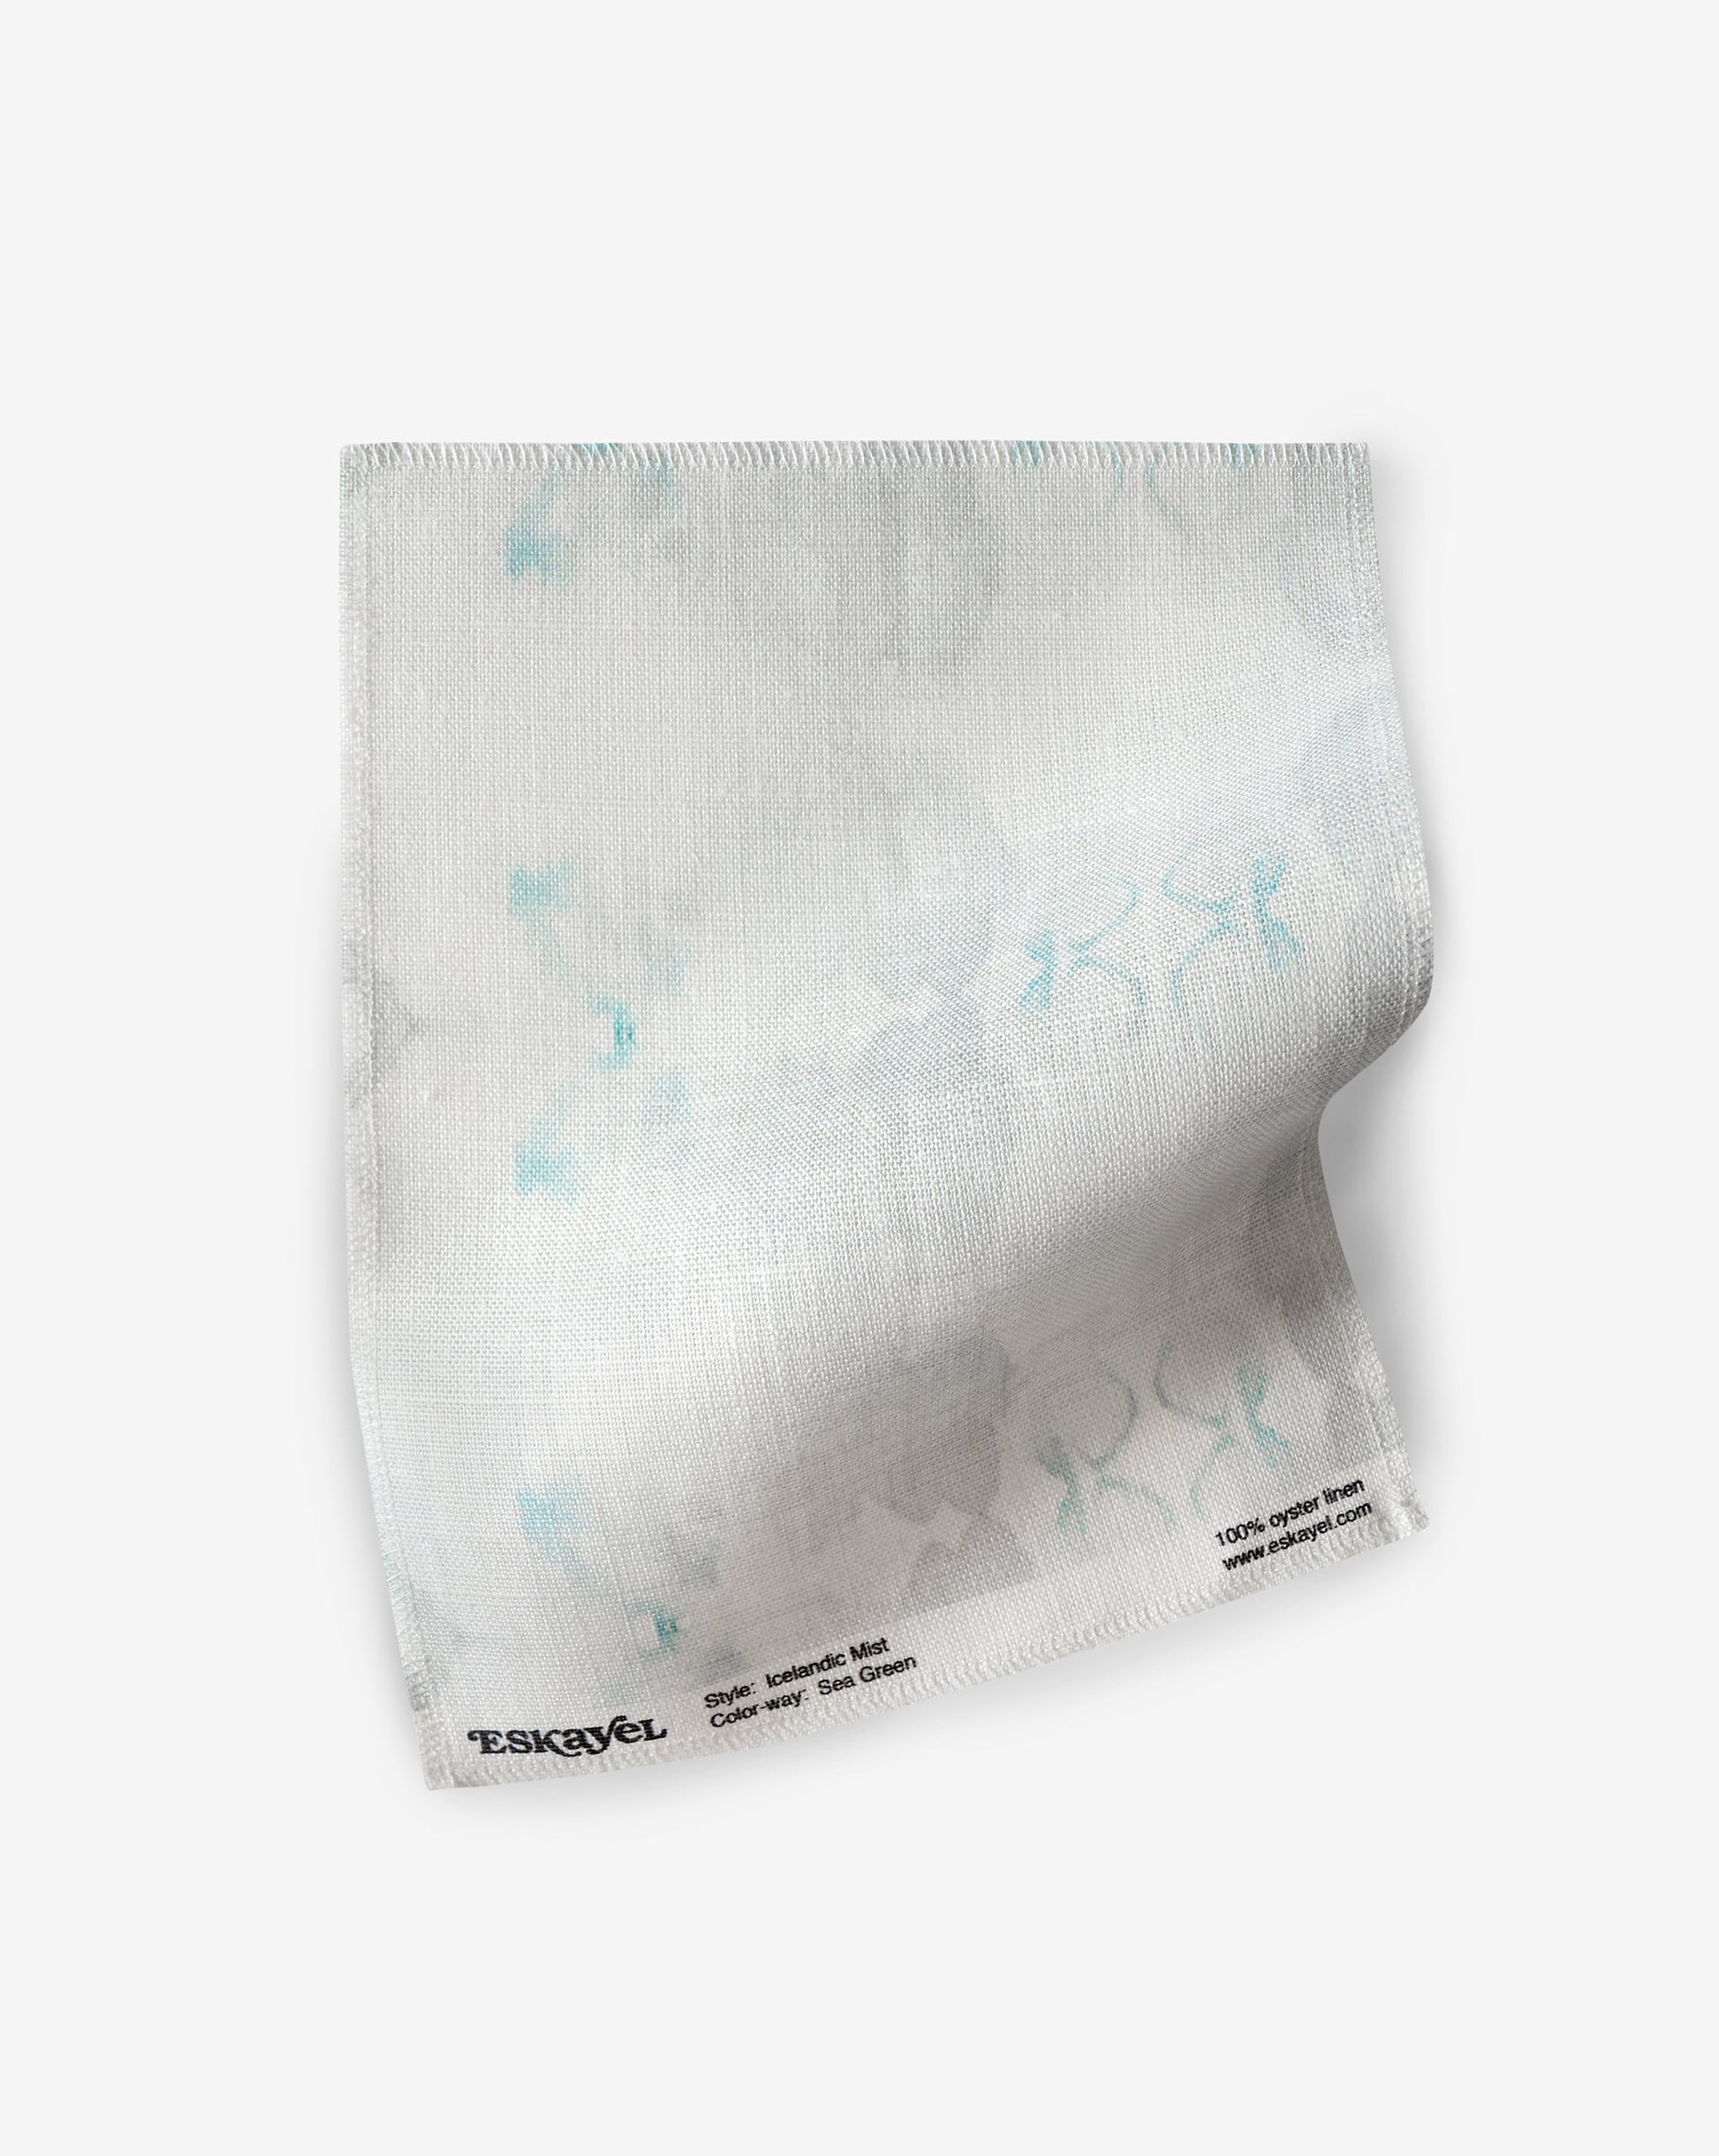 A white fabric with Icelandic Mist Fabric Sample Sea Green and white flowers on it